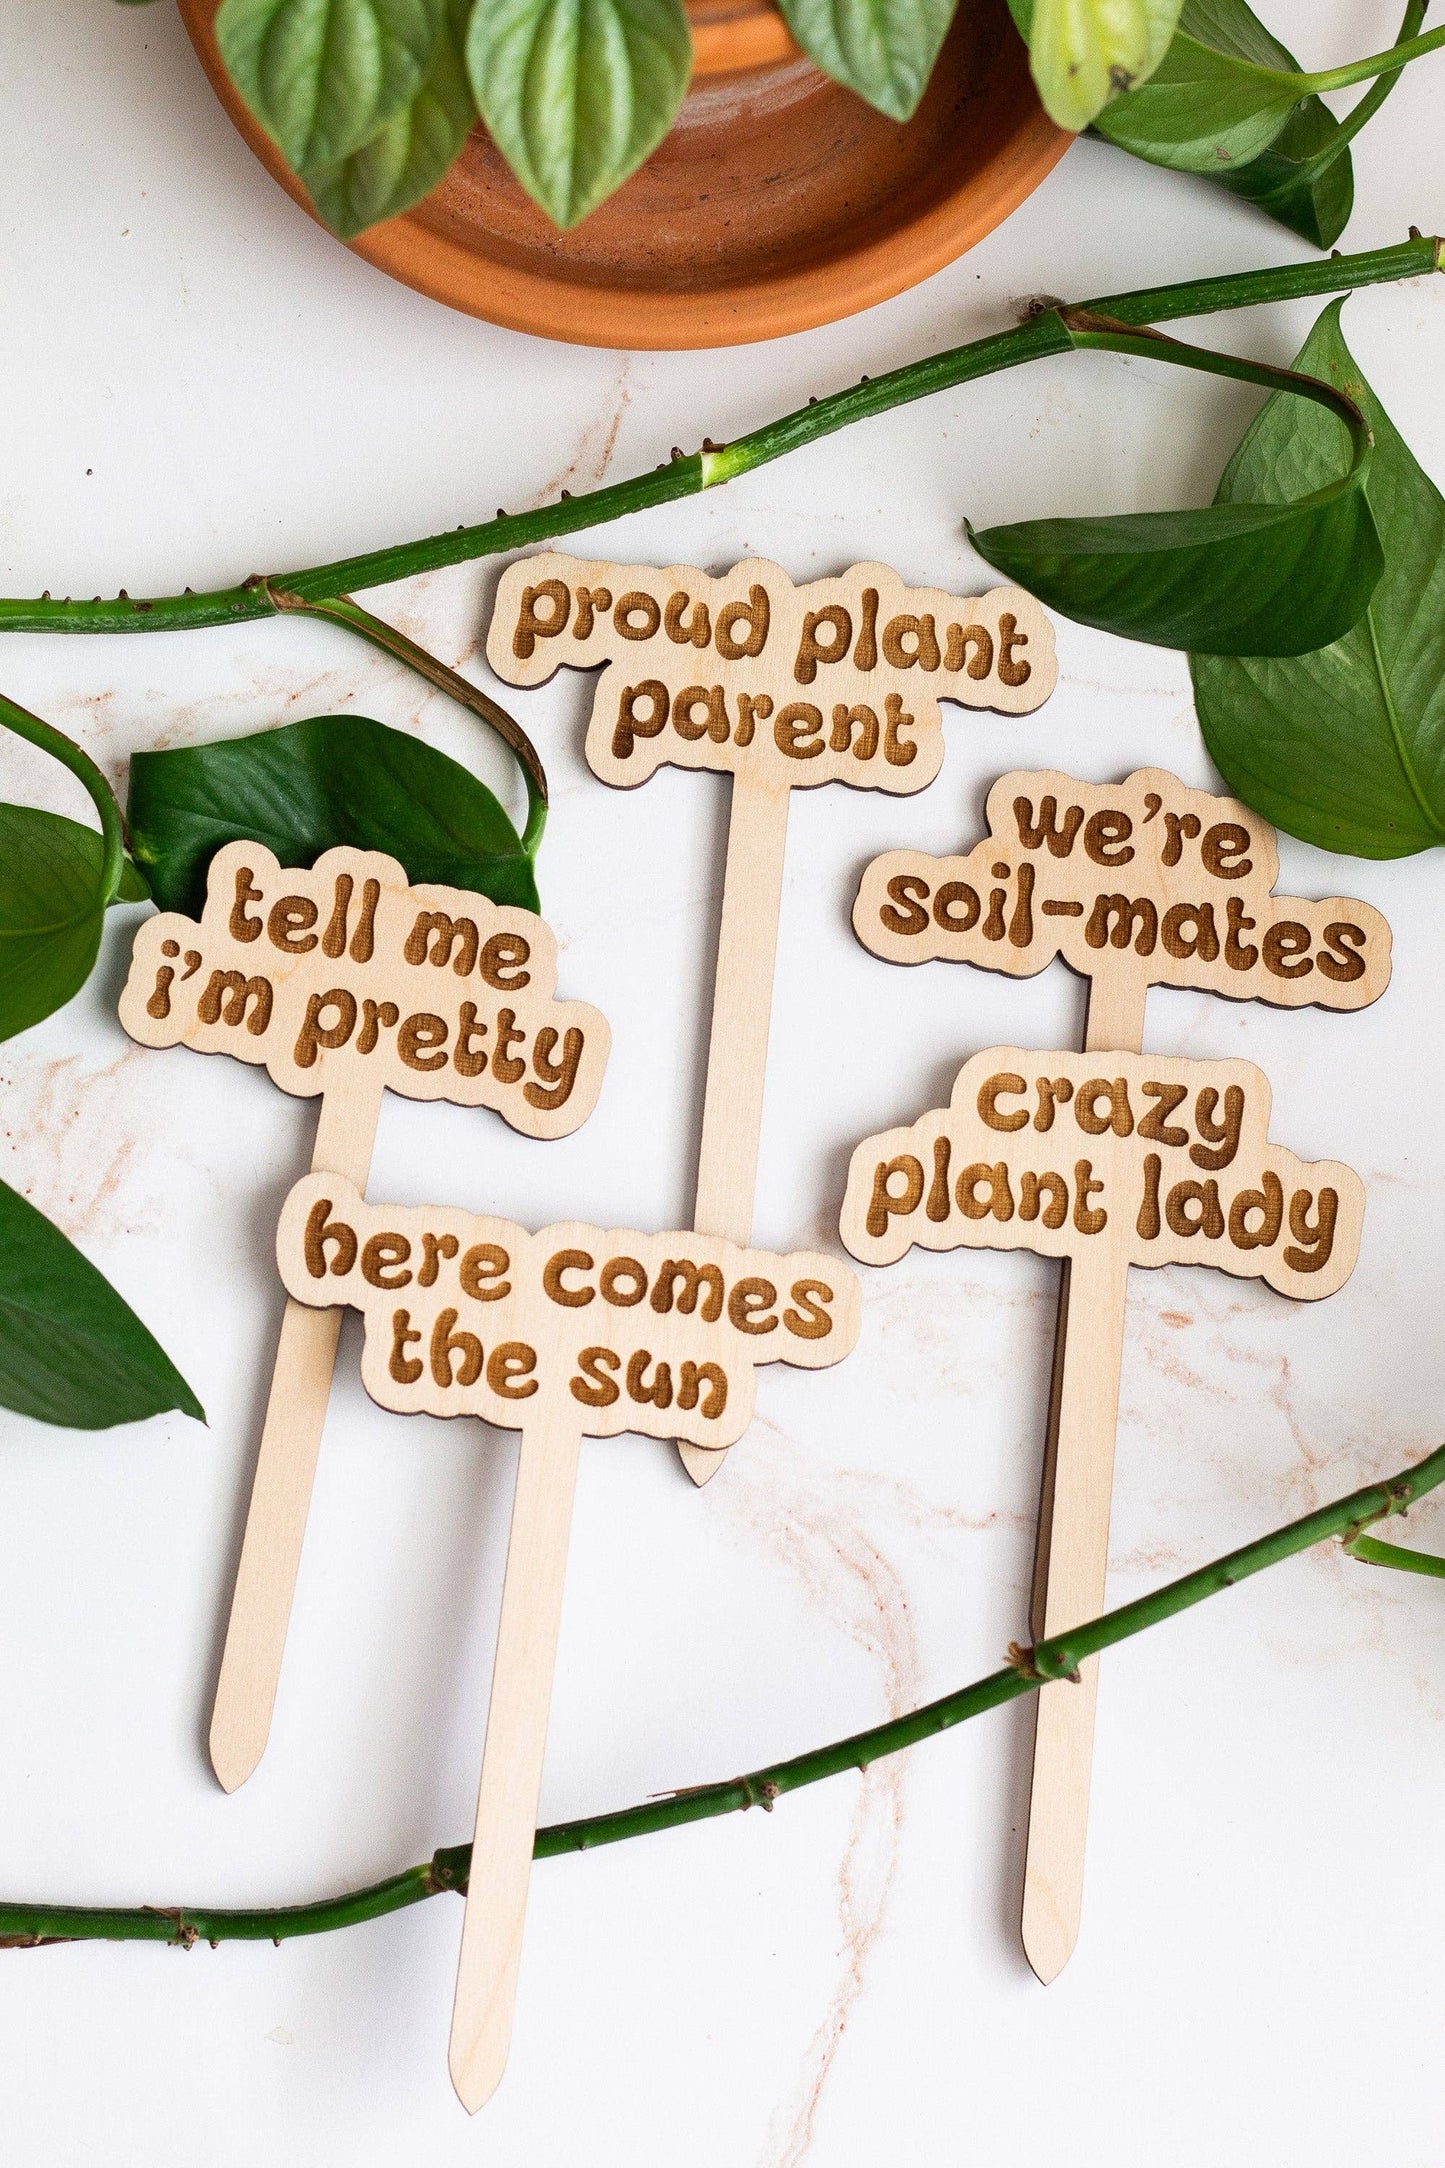 Retro Funny Wooden Plant Marker - Barely surviving